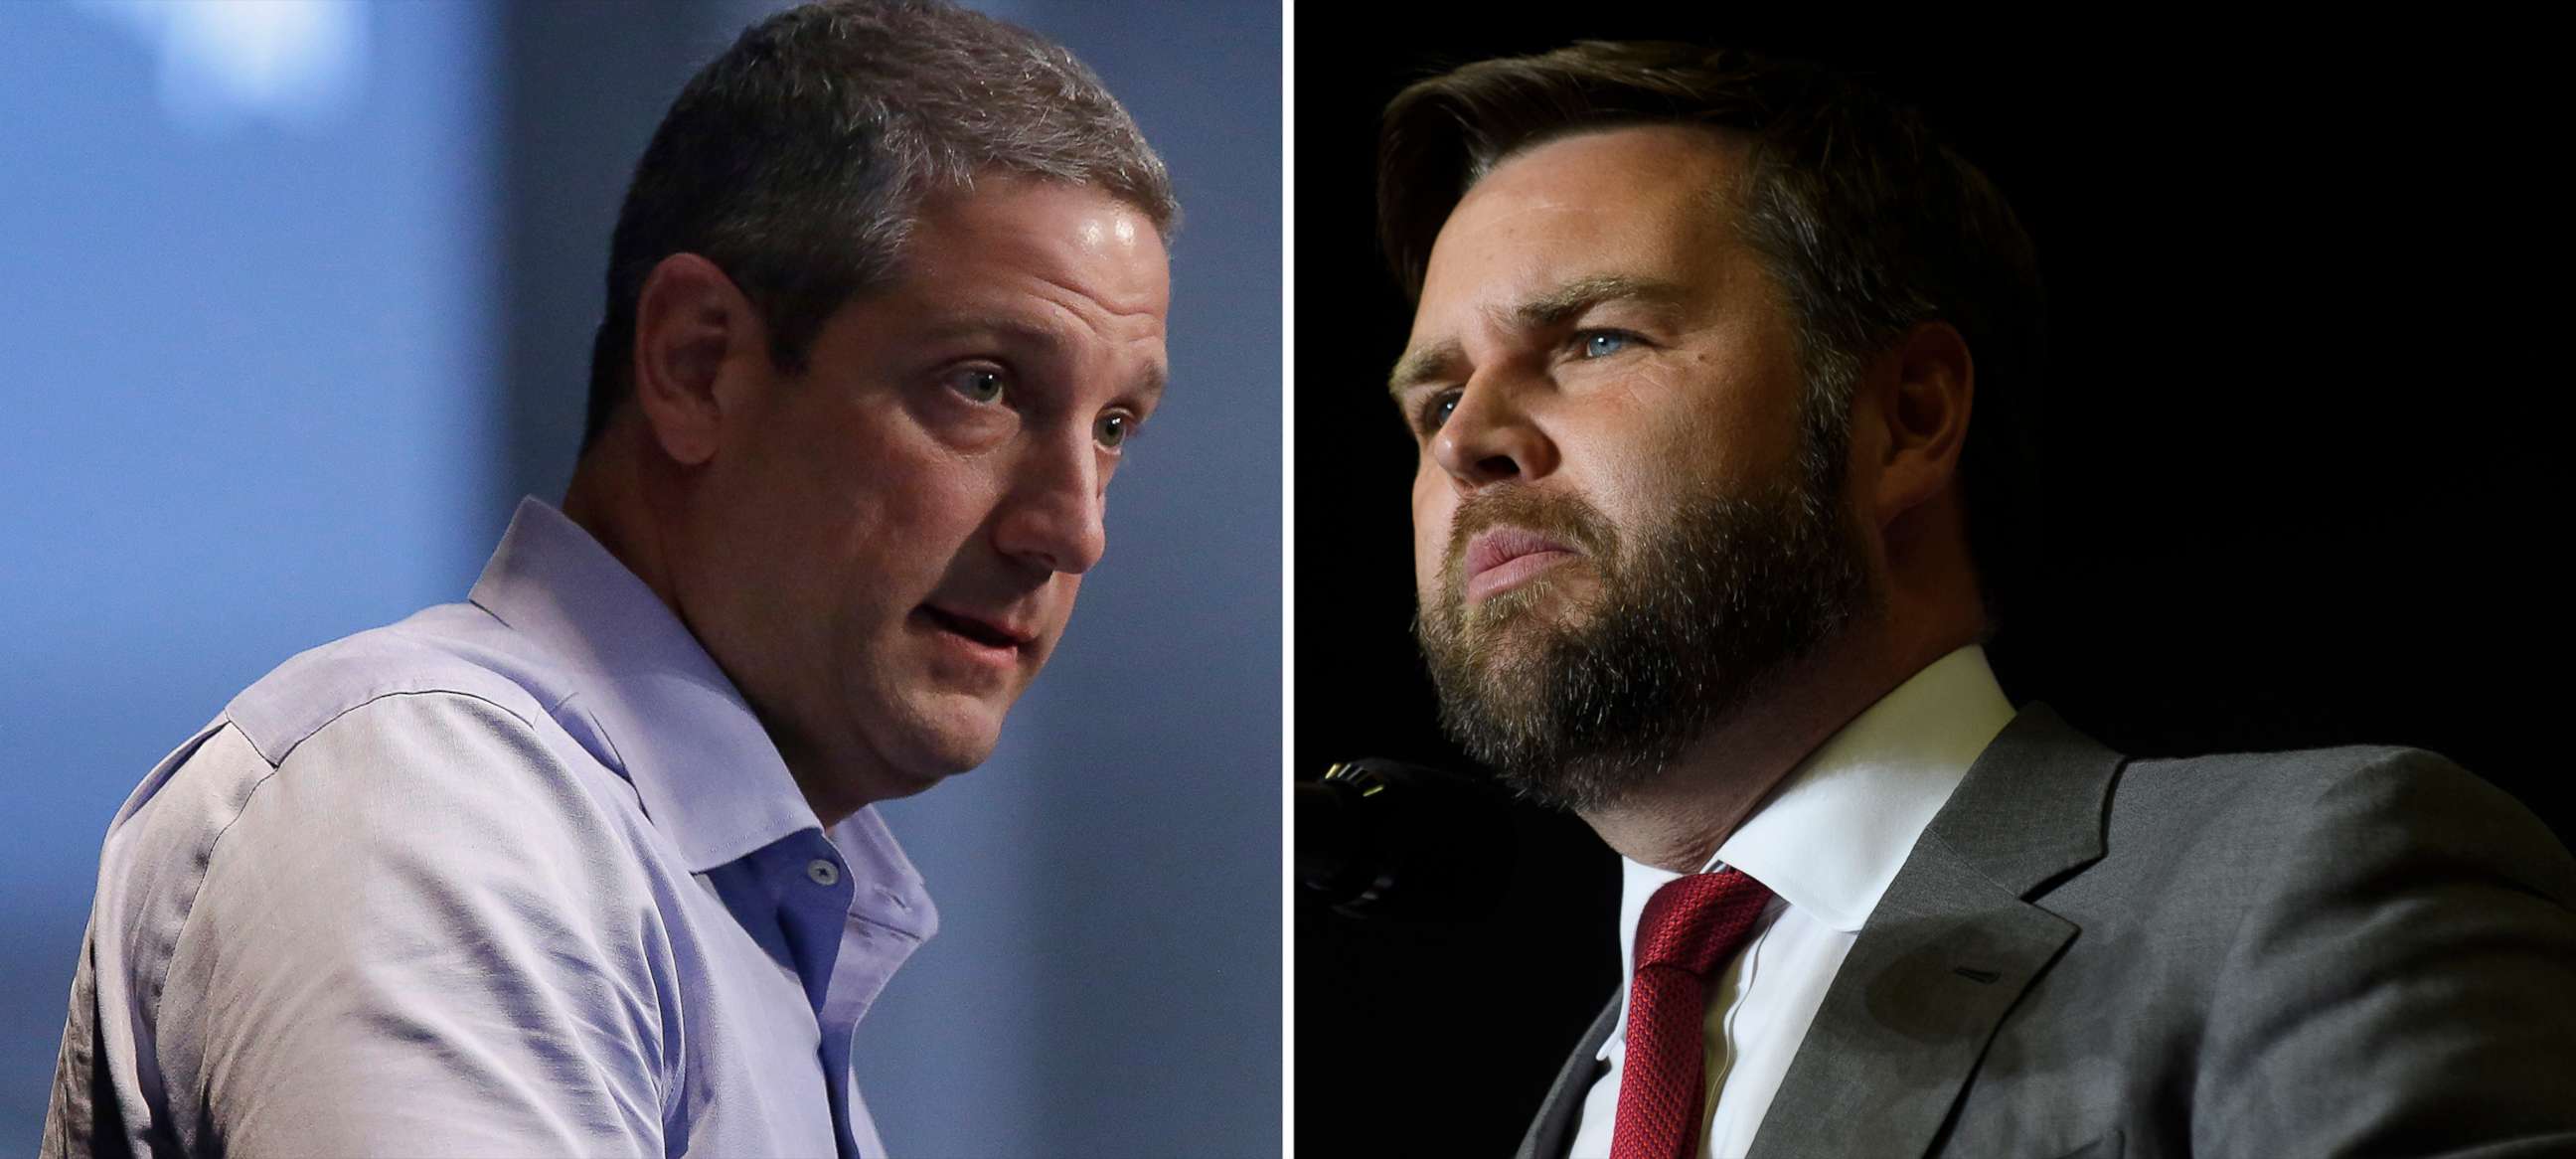 PHOTO: Democratic Rep. Tim Ryan and Republican candidate J.D. Vance, of Ohio are pictured in composited file images.